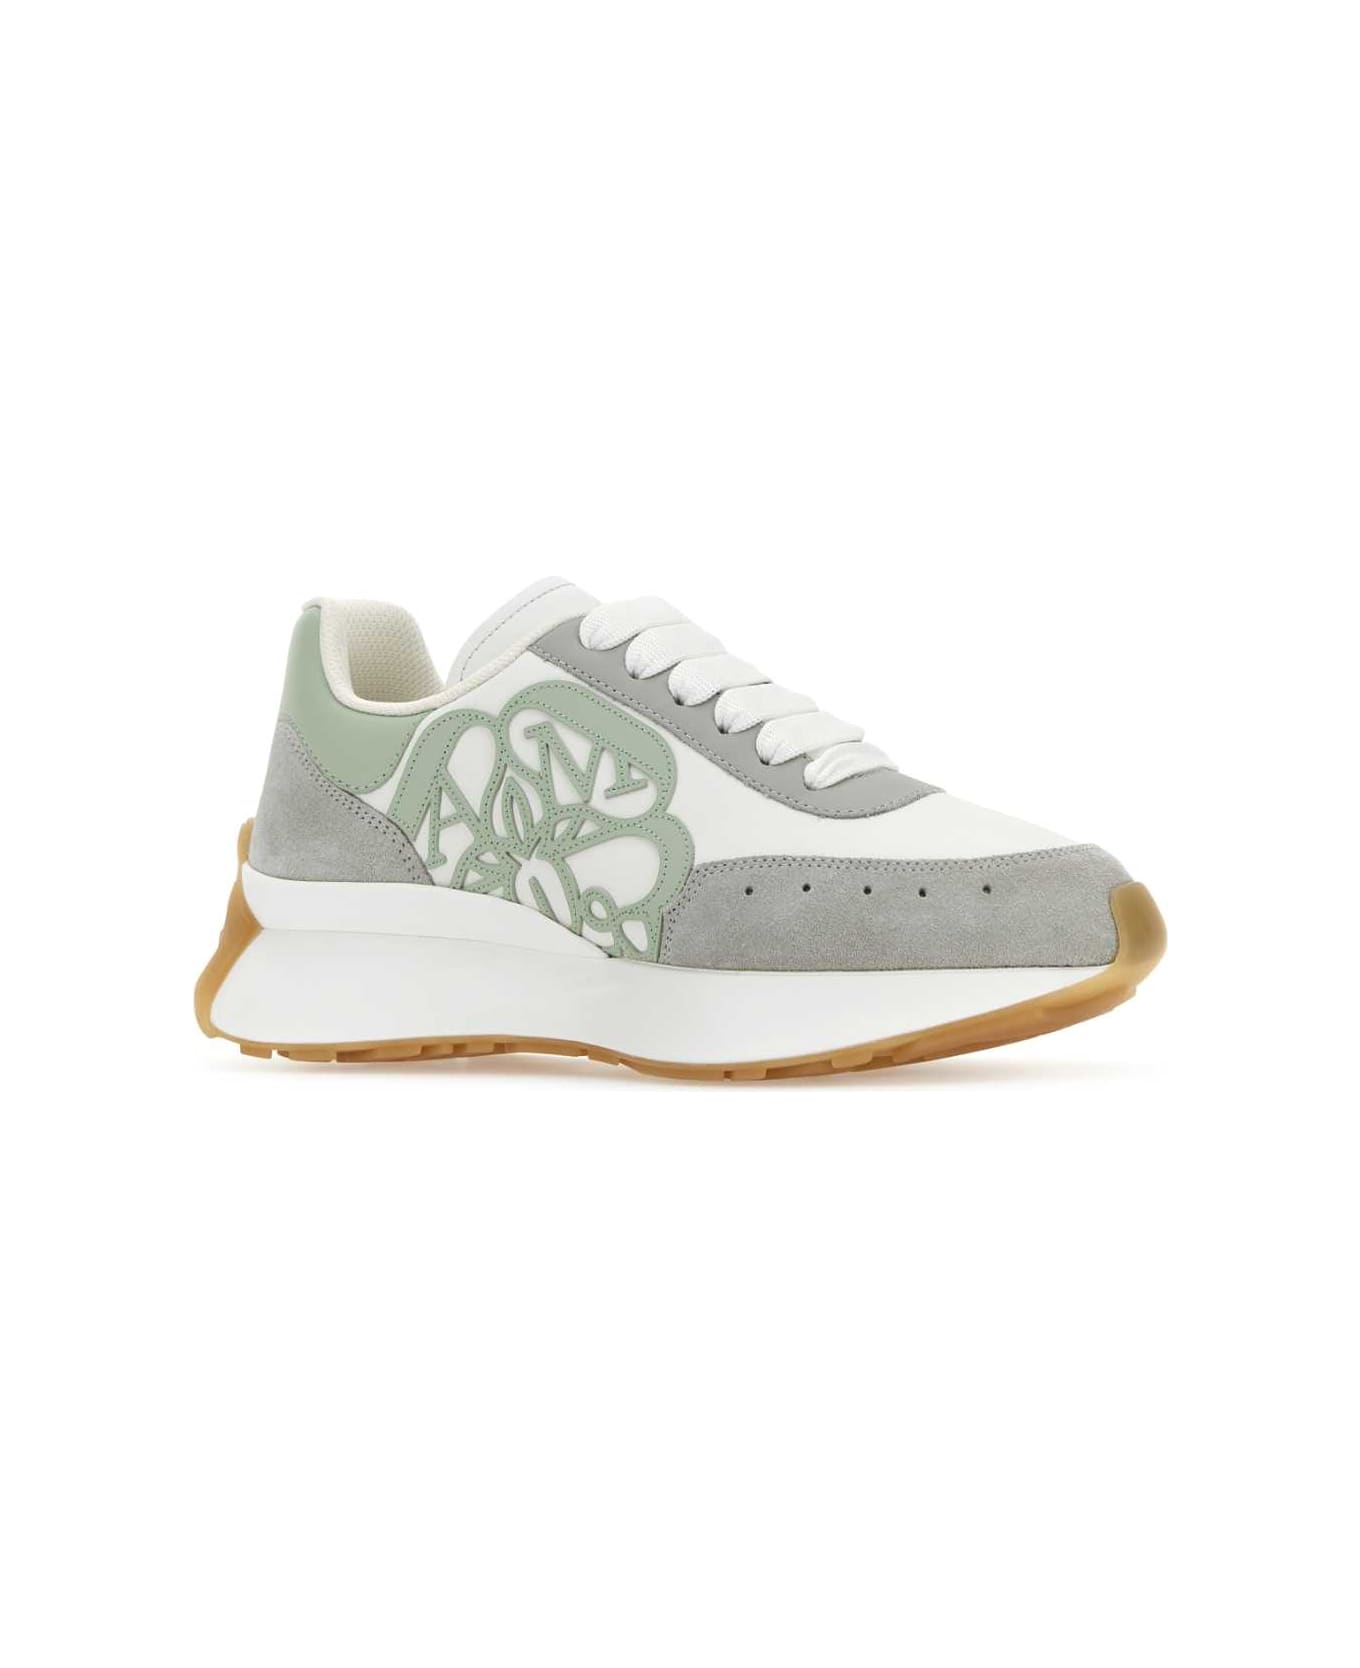 Alexander McQueen Multicolor Leather And Suede Sprint Runner Sneakers - WHCELIMISIAM